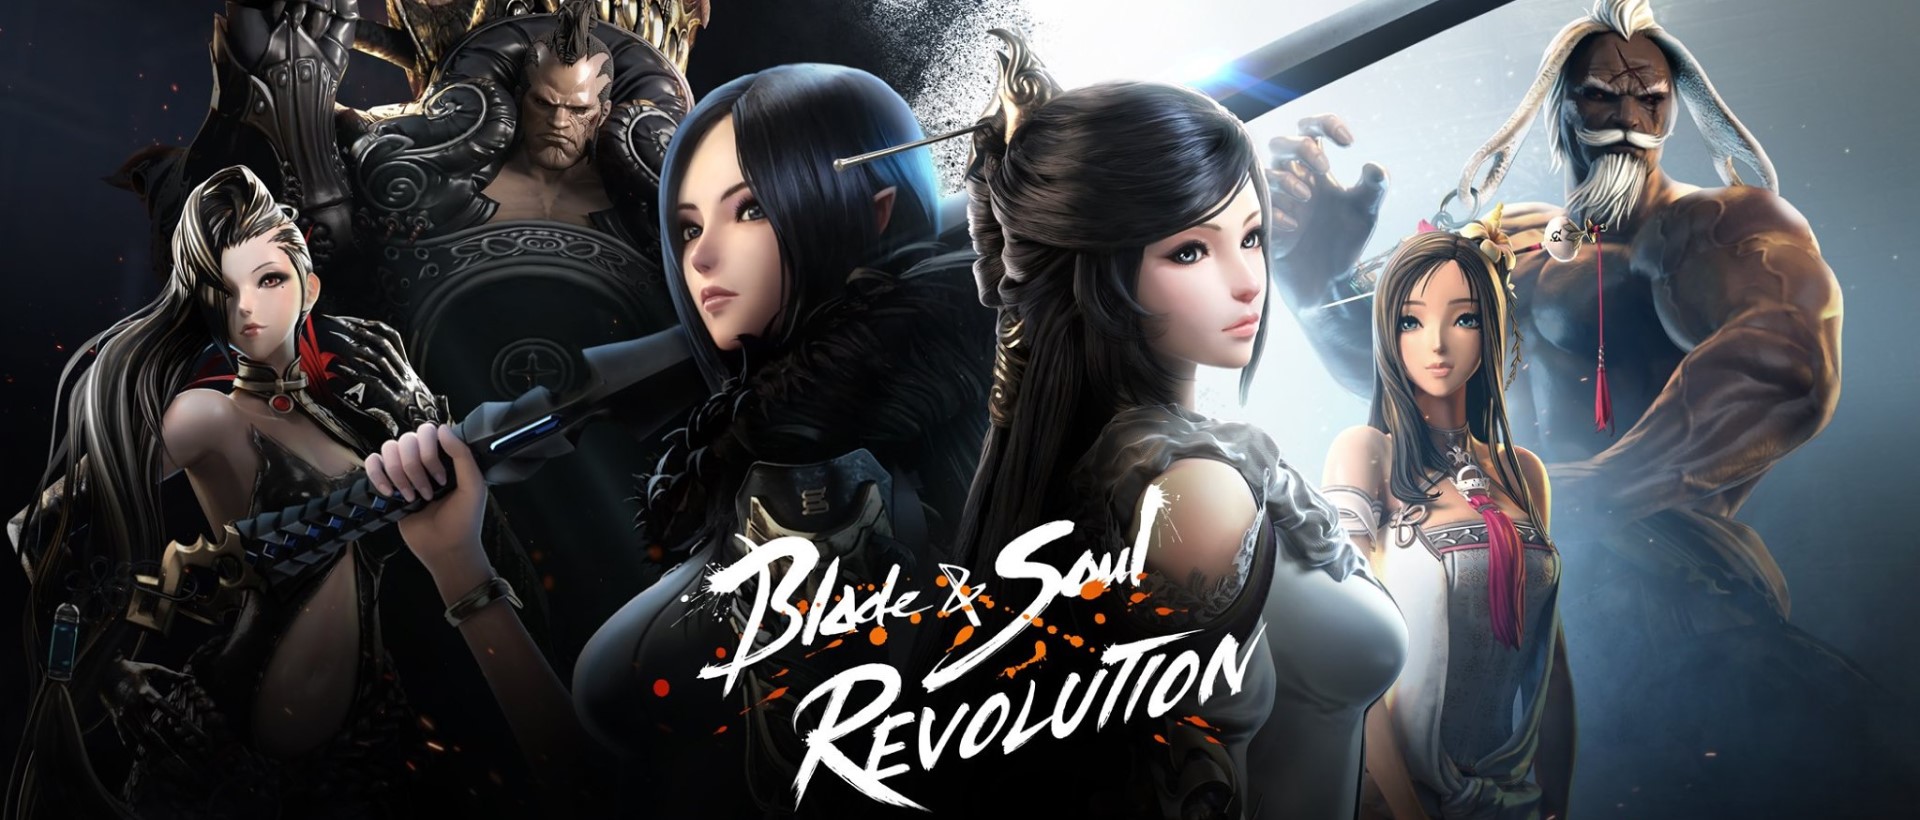 Download & Play Blade & Soul Revolution on PC & Mac with NoxPlayer (Emulator)